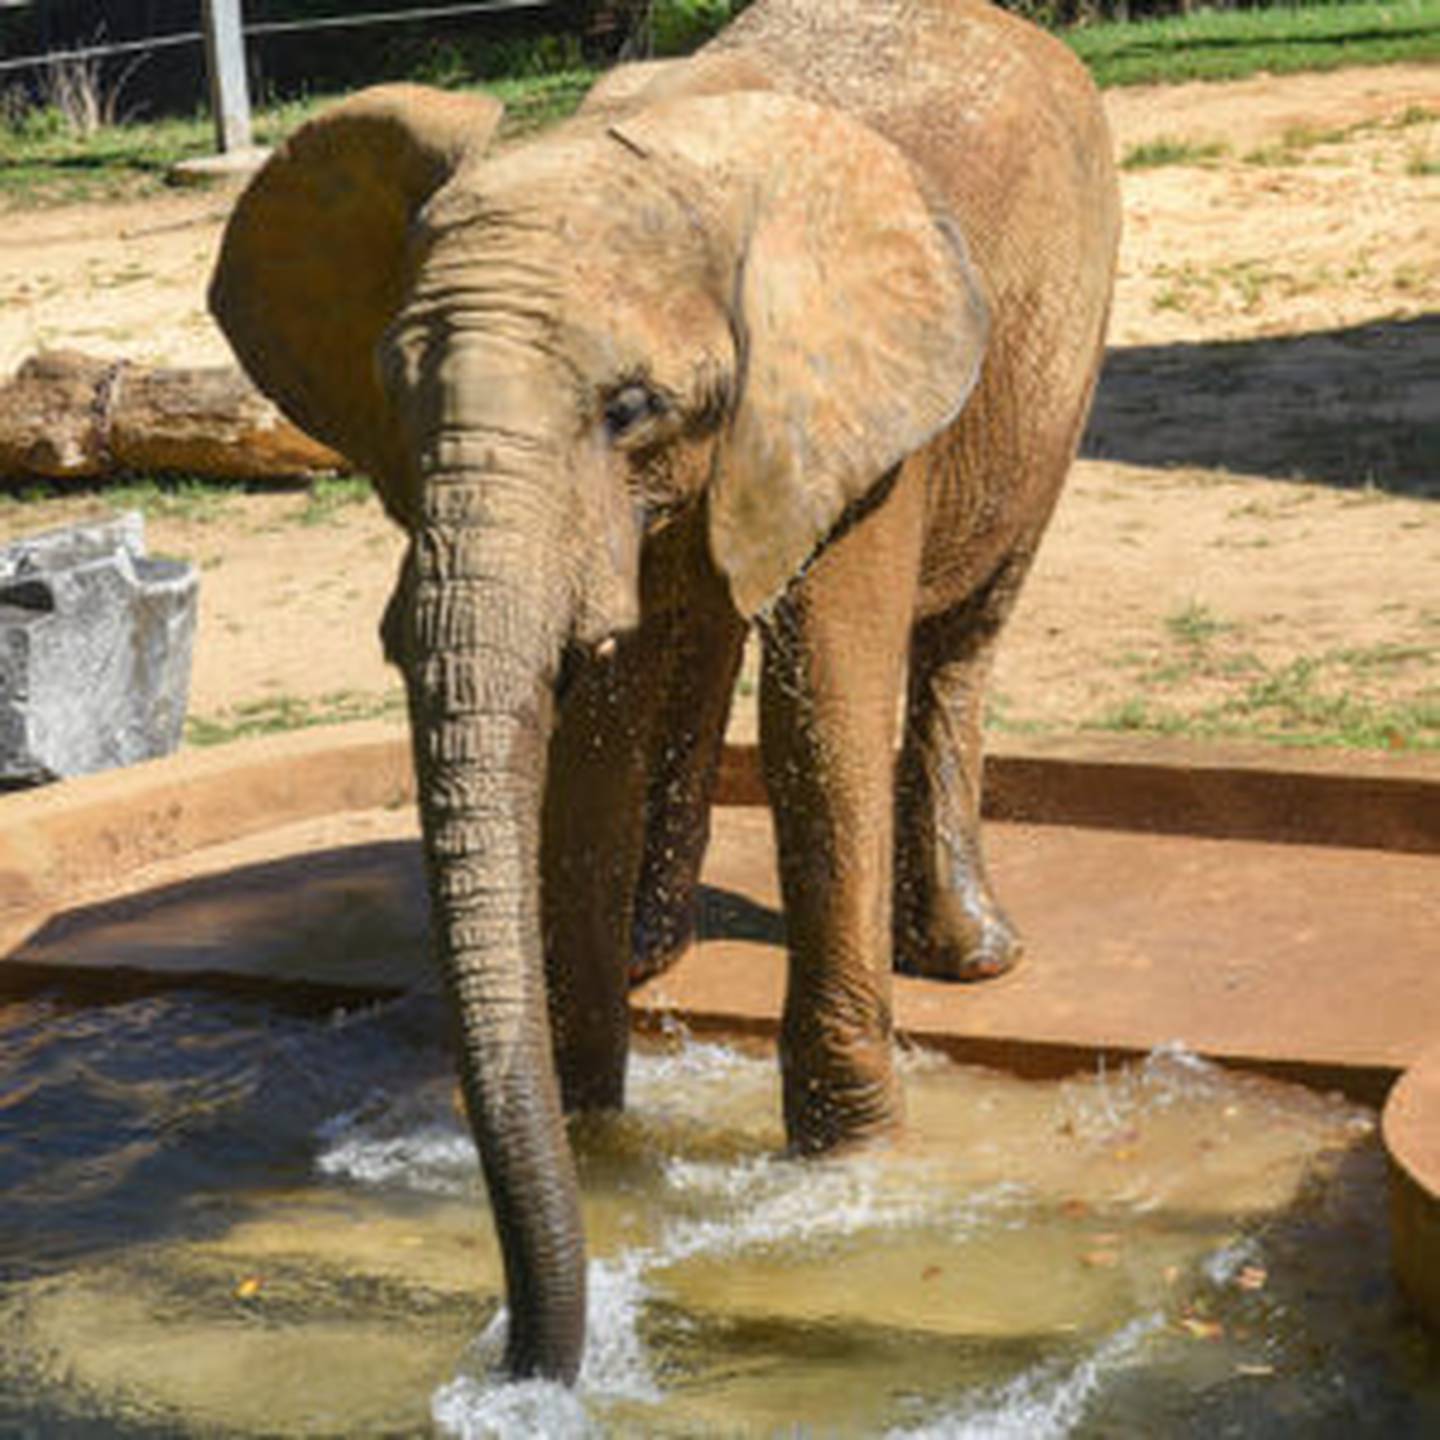 Samson the bull elephant is proving he’s lucky twice.
The 15-year-old African bull elephant at the Maryland Zoo survived a second bout with a strain of the Elephant Endotheliotropic Herpesvirus (EEHV6), the zoo said Friday in a statement.